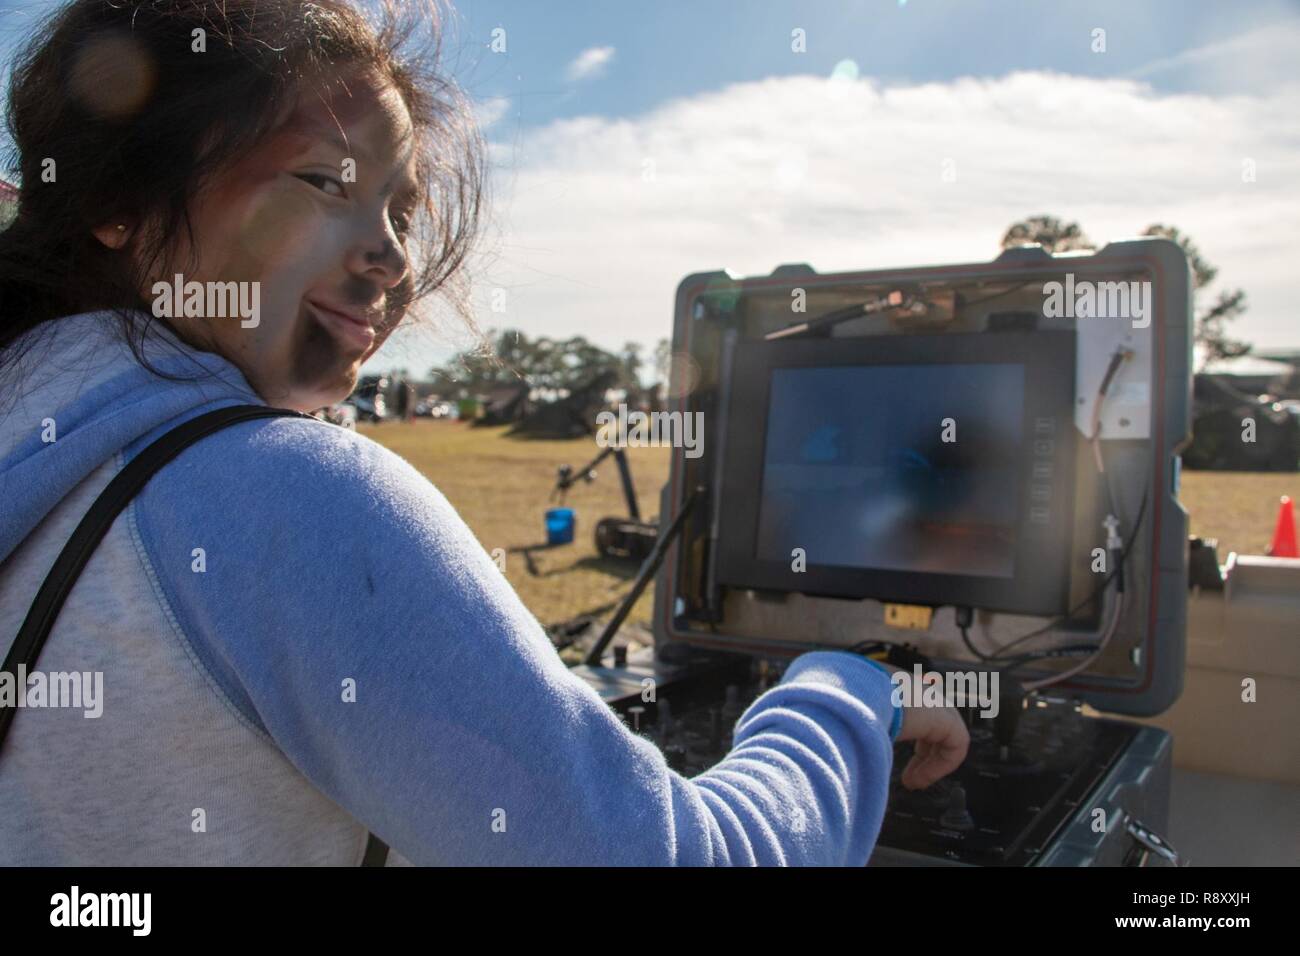 Jennifer Solorzano operates the “Foster-Miller Talon”, a remotely operated tracked vehicle designed to remove explosives from the battlefield, at the Family Day event during Marne Week at Fort Stewart, Ga., Dec. 6, 2018. Every year, 3rd ID celebrates Marne Week in order to recognize the achievements of the Dogface leaders, Soldiers and Families. This year, the Marne Division celebrated the 100th anniversary of the Battle of the Marne-the historic World War 1 battle where the division adopted their moniker of the “The Rock of the Marne.’ Stock Photo